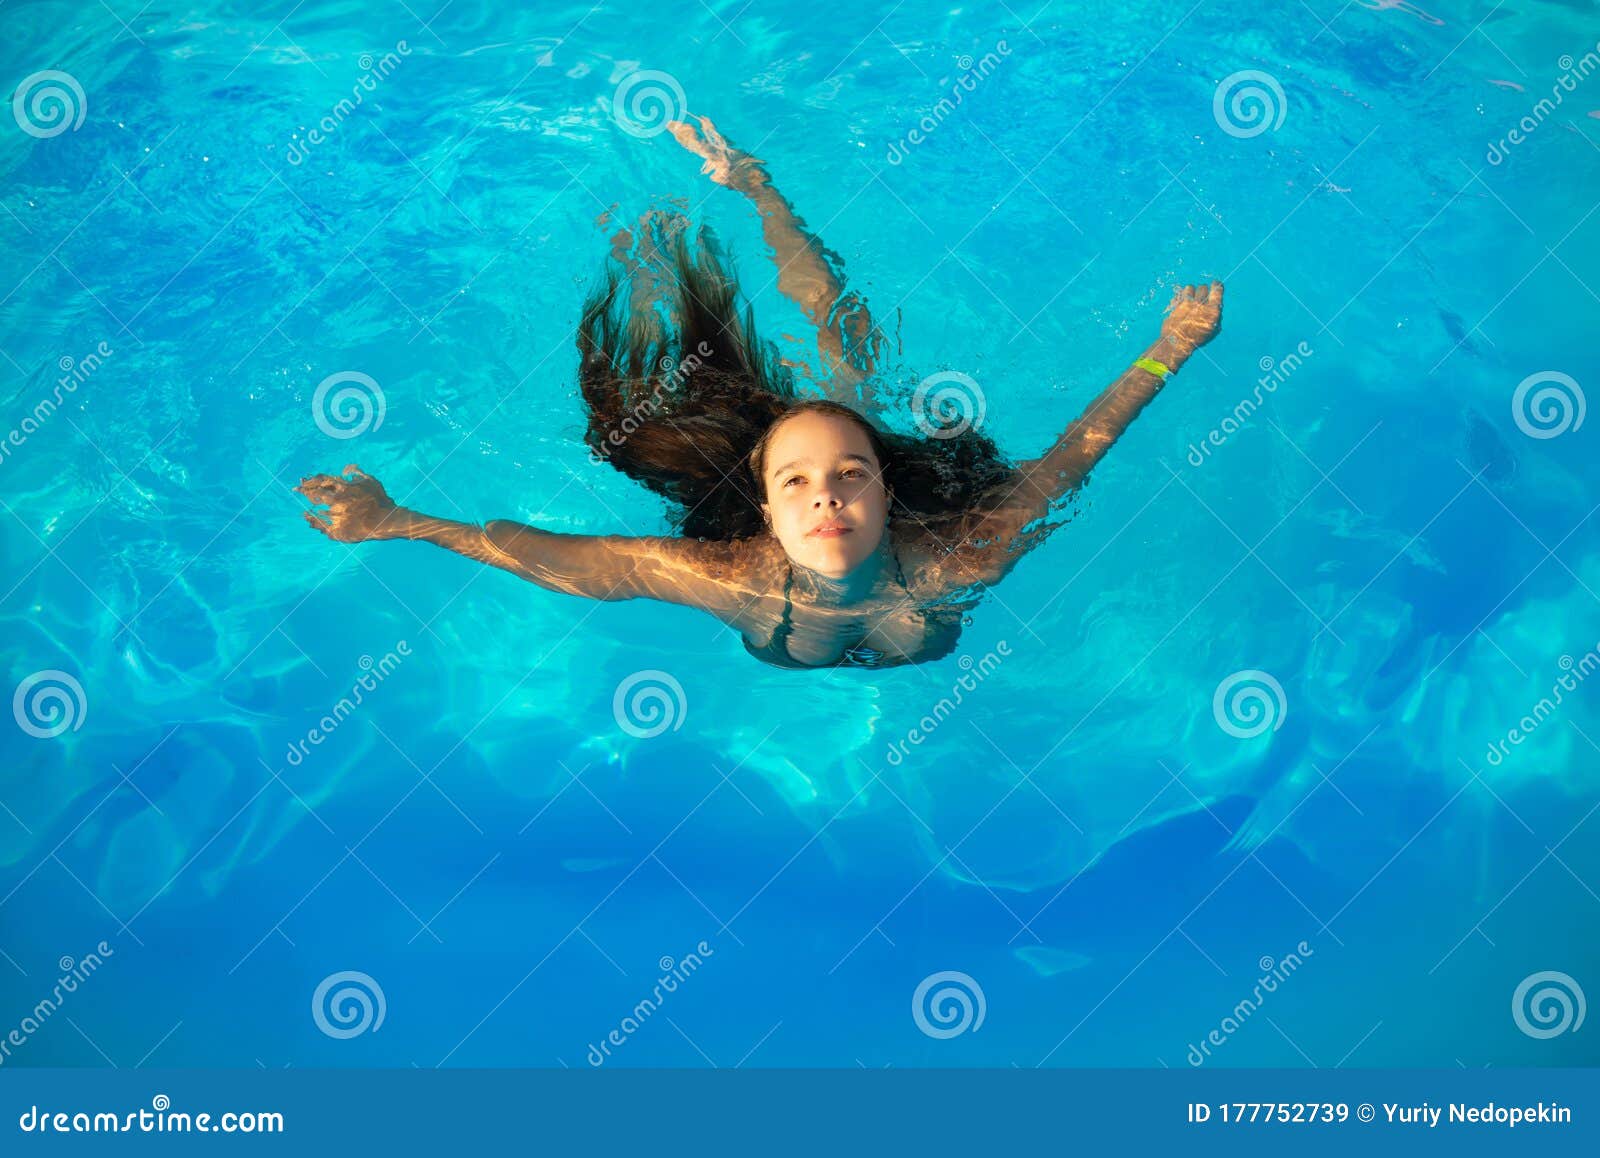 Top View Girl Teenager Swims in the Pool Stock Image - Image of people ...